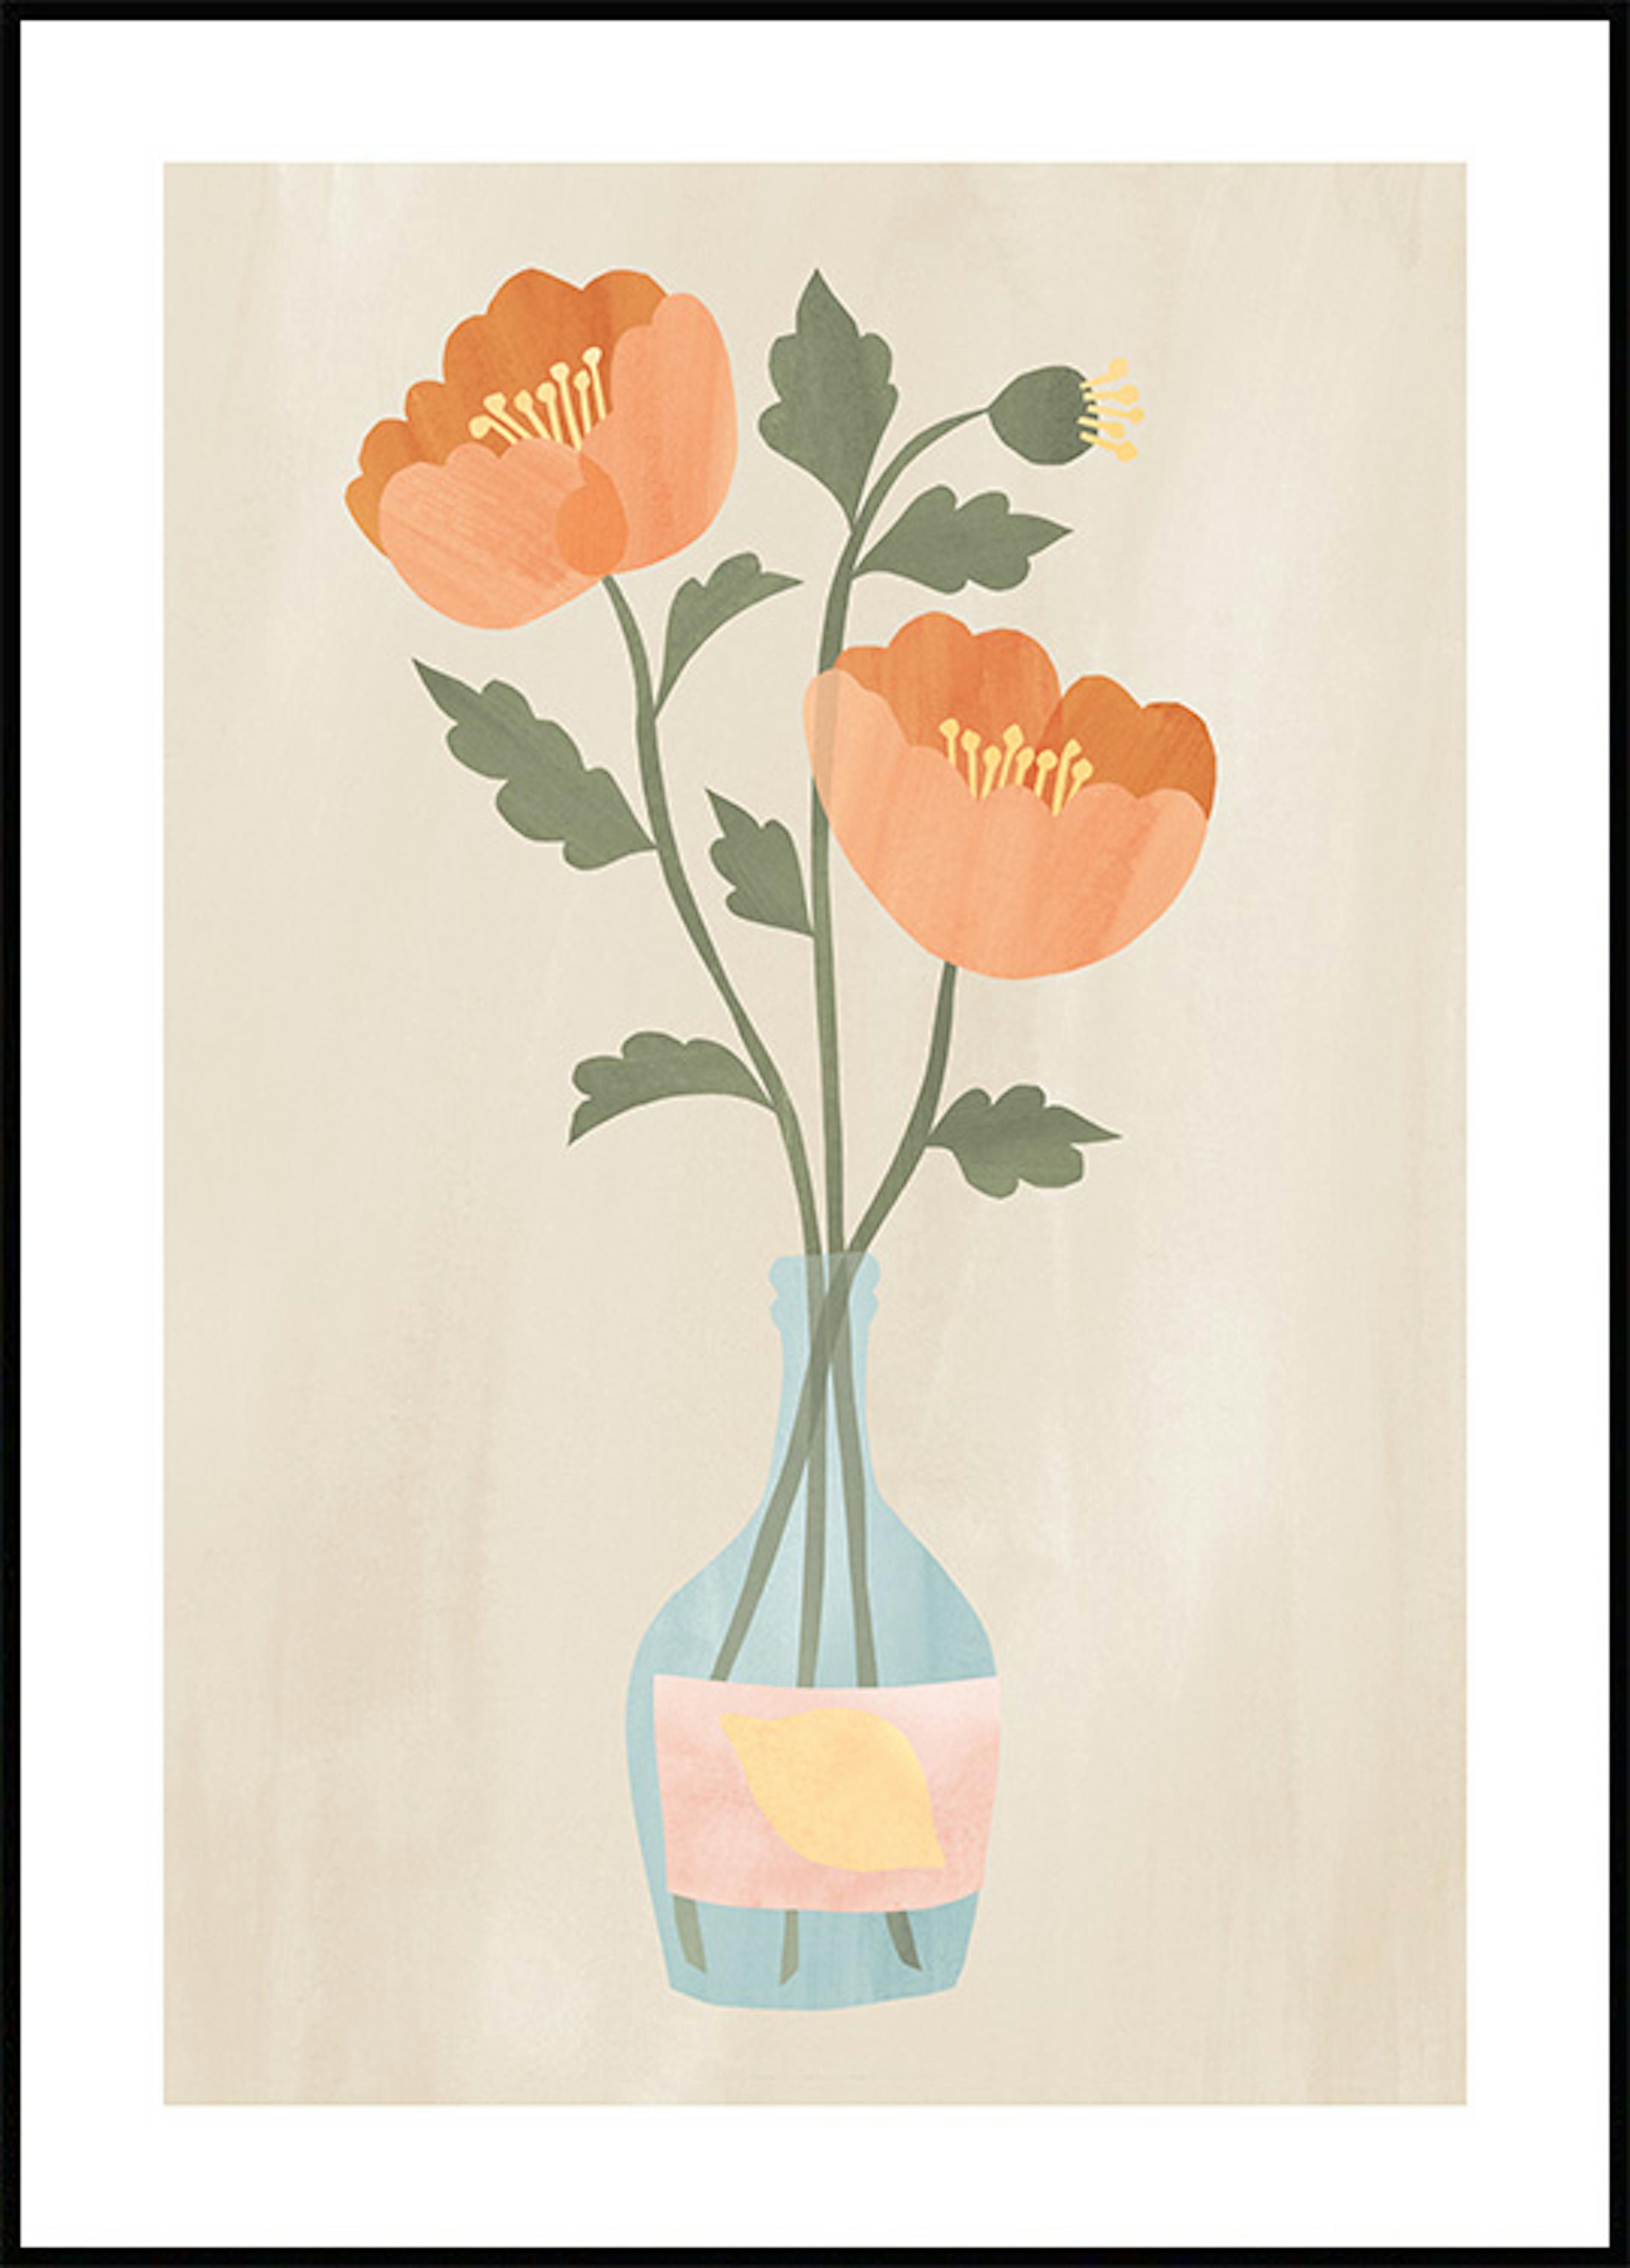 Abstract Poppy Bouquet Poster 0